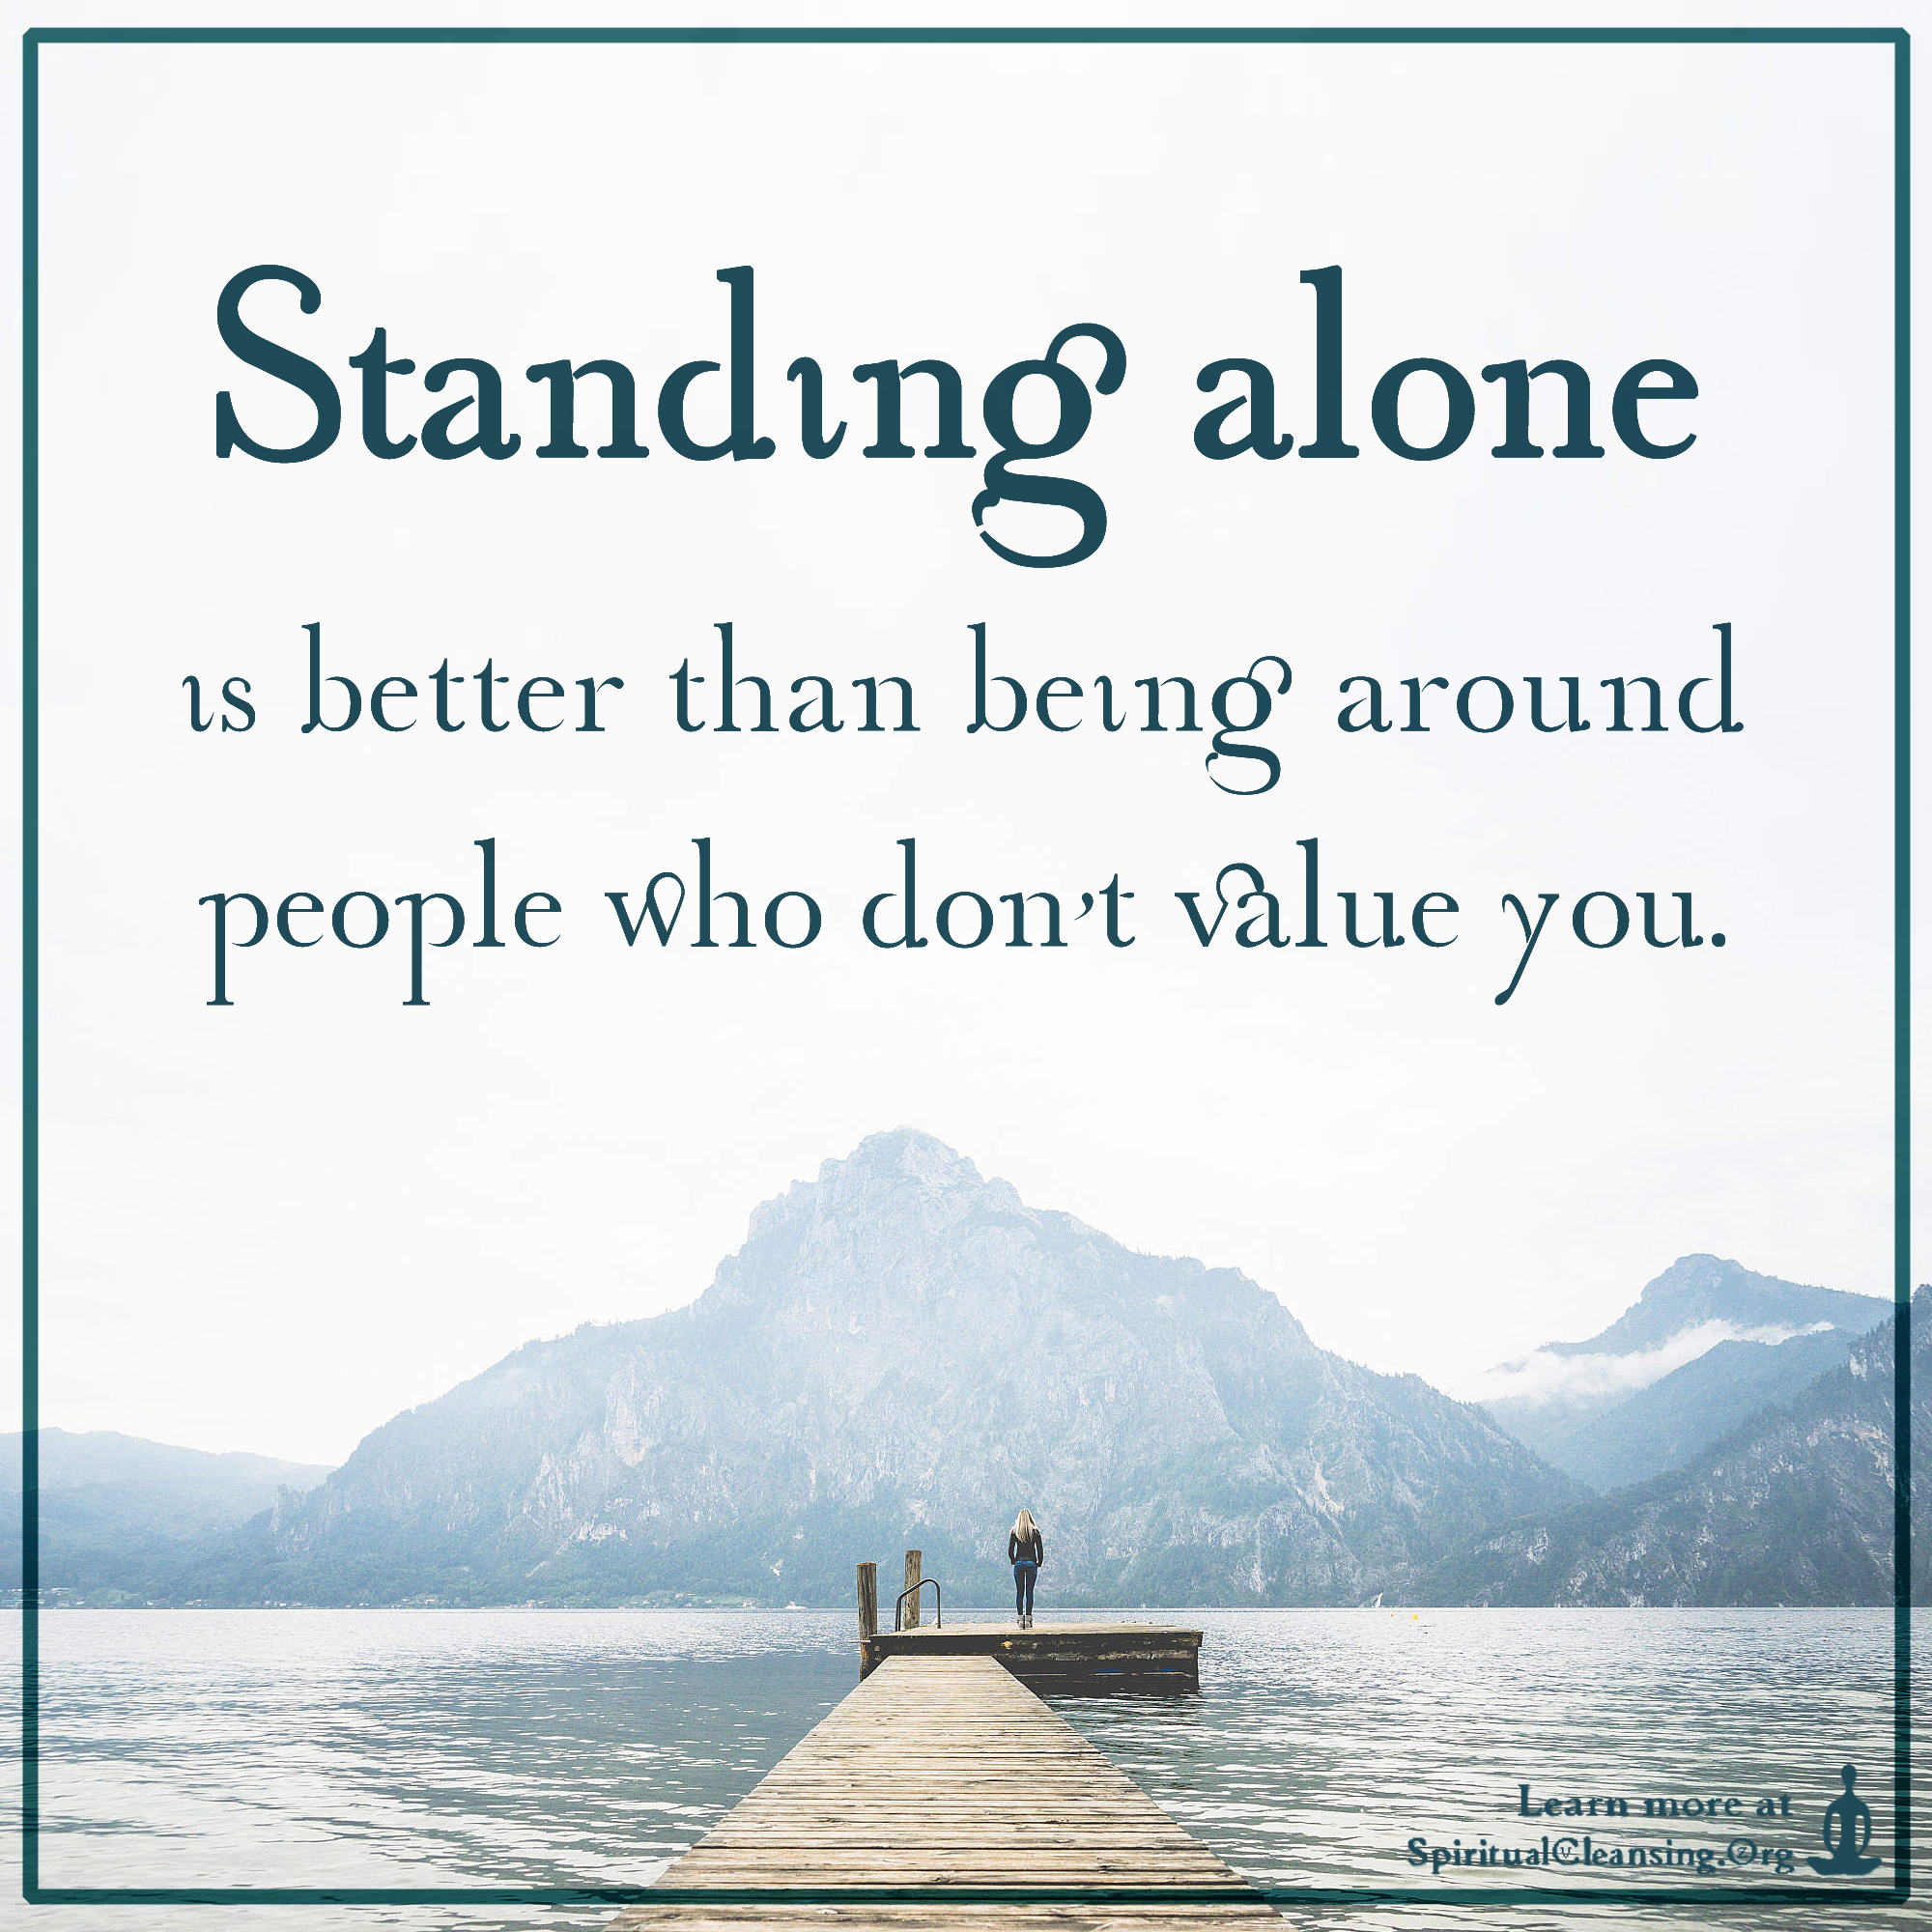 Standing alone is better than being around people who don’t value you